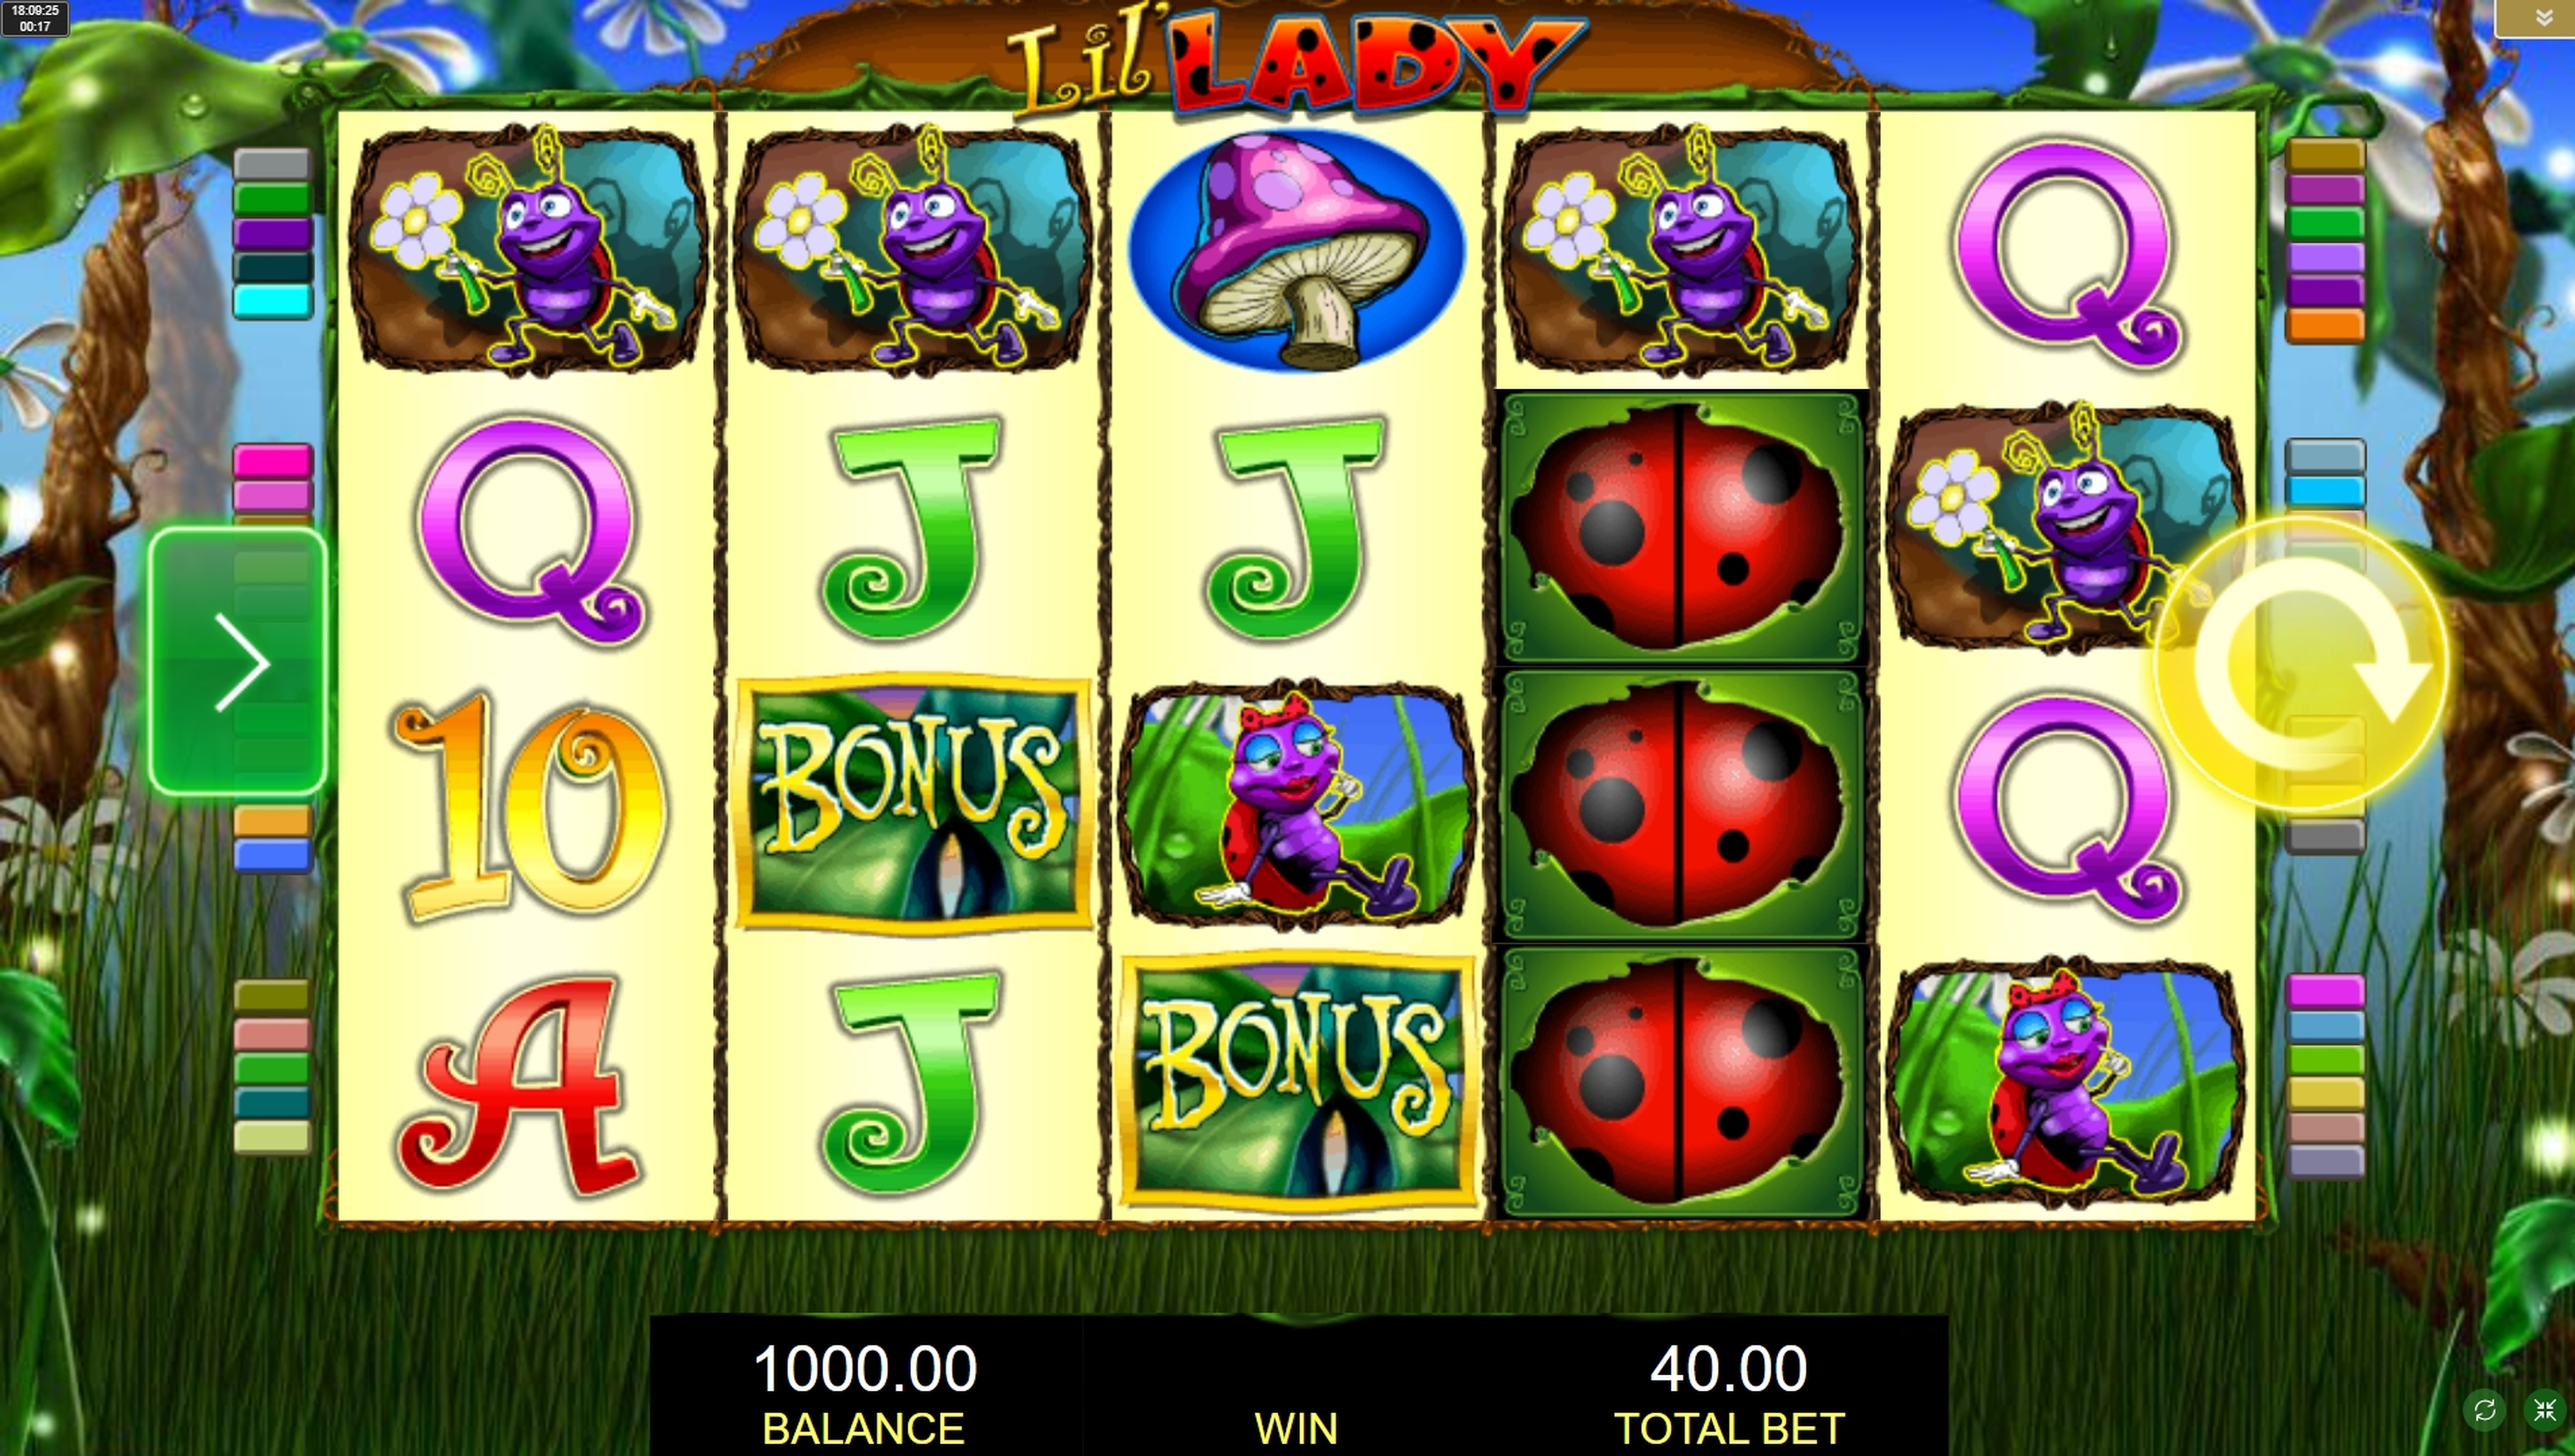 Reels in Lil' Lady Slot Game by IGT